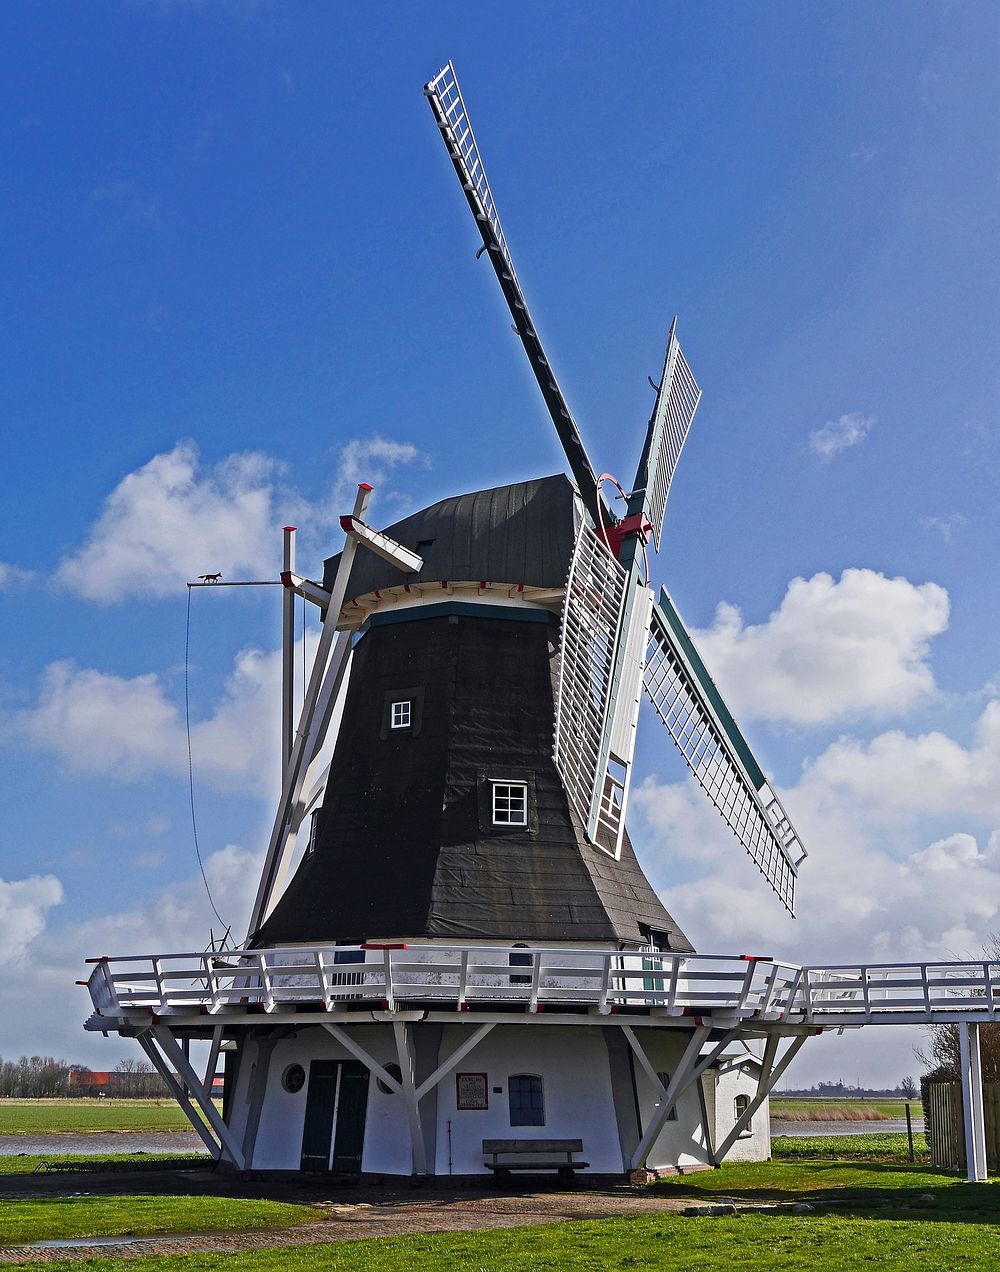 Old windmill in countryside. Free public domain CC0 image.